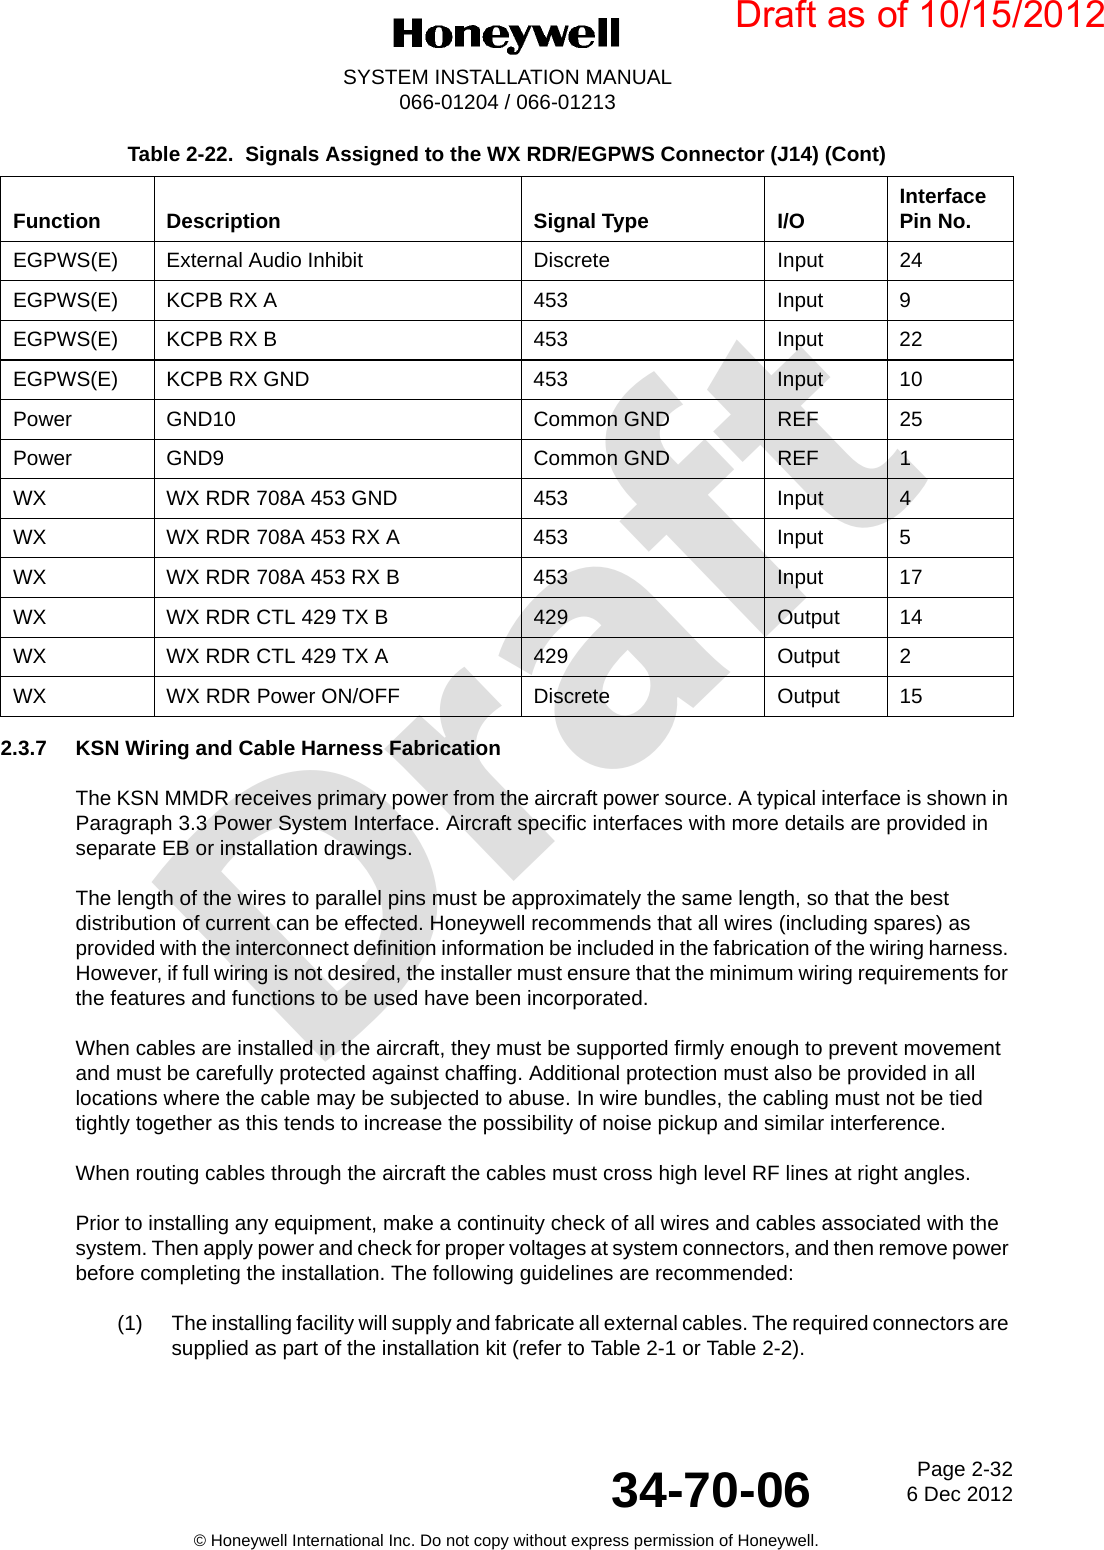 DraftPage 2-326 Dec 201234-70-06SYSTEM INSTALLATION MANUAL066-01204 / 066-01213© Honeywell International Inc. Do not copy without express permission of Honeywell.2.3.7 KSN Wiring and Cable Harness FabricationThe KSN MMDR receives primary power from the aircraft power source. A typical interface is shown in Paragraph 3.3 Power System Interface. Aircraft specific interfaces with more details are provided in separate EB or installation drawings.The length of the wires to parallel pins must be approximately the same length, so that the best distribution of current can be effected. Honeywell recommends that all wires (including spares) as provided with the interconnect definition information be included in the fabrication of the wiring harness. However, if full wiring is not desired, the installer must ensure that the minimum wiring requirements for the features and functions to be used have been incorporated.When cables are installed in the aircraft, they must be supported firmly enough to prevent movement and must be carefully protected against chaffing. Additional protection must also be provided in all locations where the cable may be subjected to abuse. In wire bundles, the cabling must not be tied tightly together as this tends to increase the possibility of noise pickup and similar interference.When routing cables through the aircraft the cables must cross high level RF lines at right angles.Prior to installing any equipment, make a continuity check of all wires and cables associated with the system. Then apply power and check for proper voltages at system connectors, and then remove power before completing the installation. The following guidelines are recommended:(1) The installing facility will supply and fabricate all external cables. The required connectors are supplied as part of the installation kit (refer to Table 2-1 or Table 2-2).EGPWS(E) External Audio Inhibit Discrete Input 24EGPWS(E) KCPB RX A 453 Input 9EGPWS(E) KCPB RX B 453 Input 22EGPWS(E) KCPB RX GND 453 Input 10Power GND10 Common GND REF 25Power GND9 Common GND REF 1WX WX RDR 708A 453 GND 453 Input 4WX WX RDR 708A 453 RX A 453 Input 5WX WX RDR 708A 453 RX B 453 Input 17WX WX RDR CTL 429 TX B 429 Output 14WX WX RDR CTL 429 TX A 429 Output 2WX WX RDR Power ON/OFF Discrete Output 15Table 2-22.  Signals Assigned to the WX RDR/EGPWS Connector (J14) (Cont)Function Description Signal Type I/O Interface Pin No.Draft as of 10/15/2012